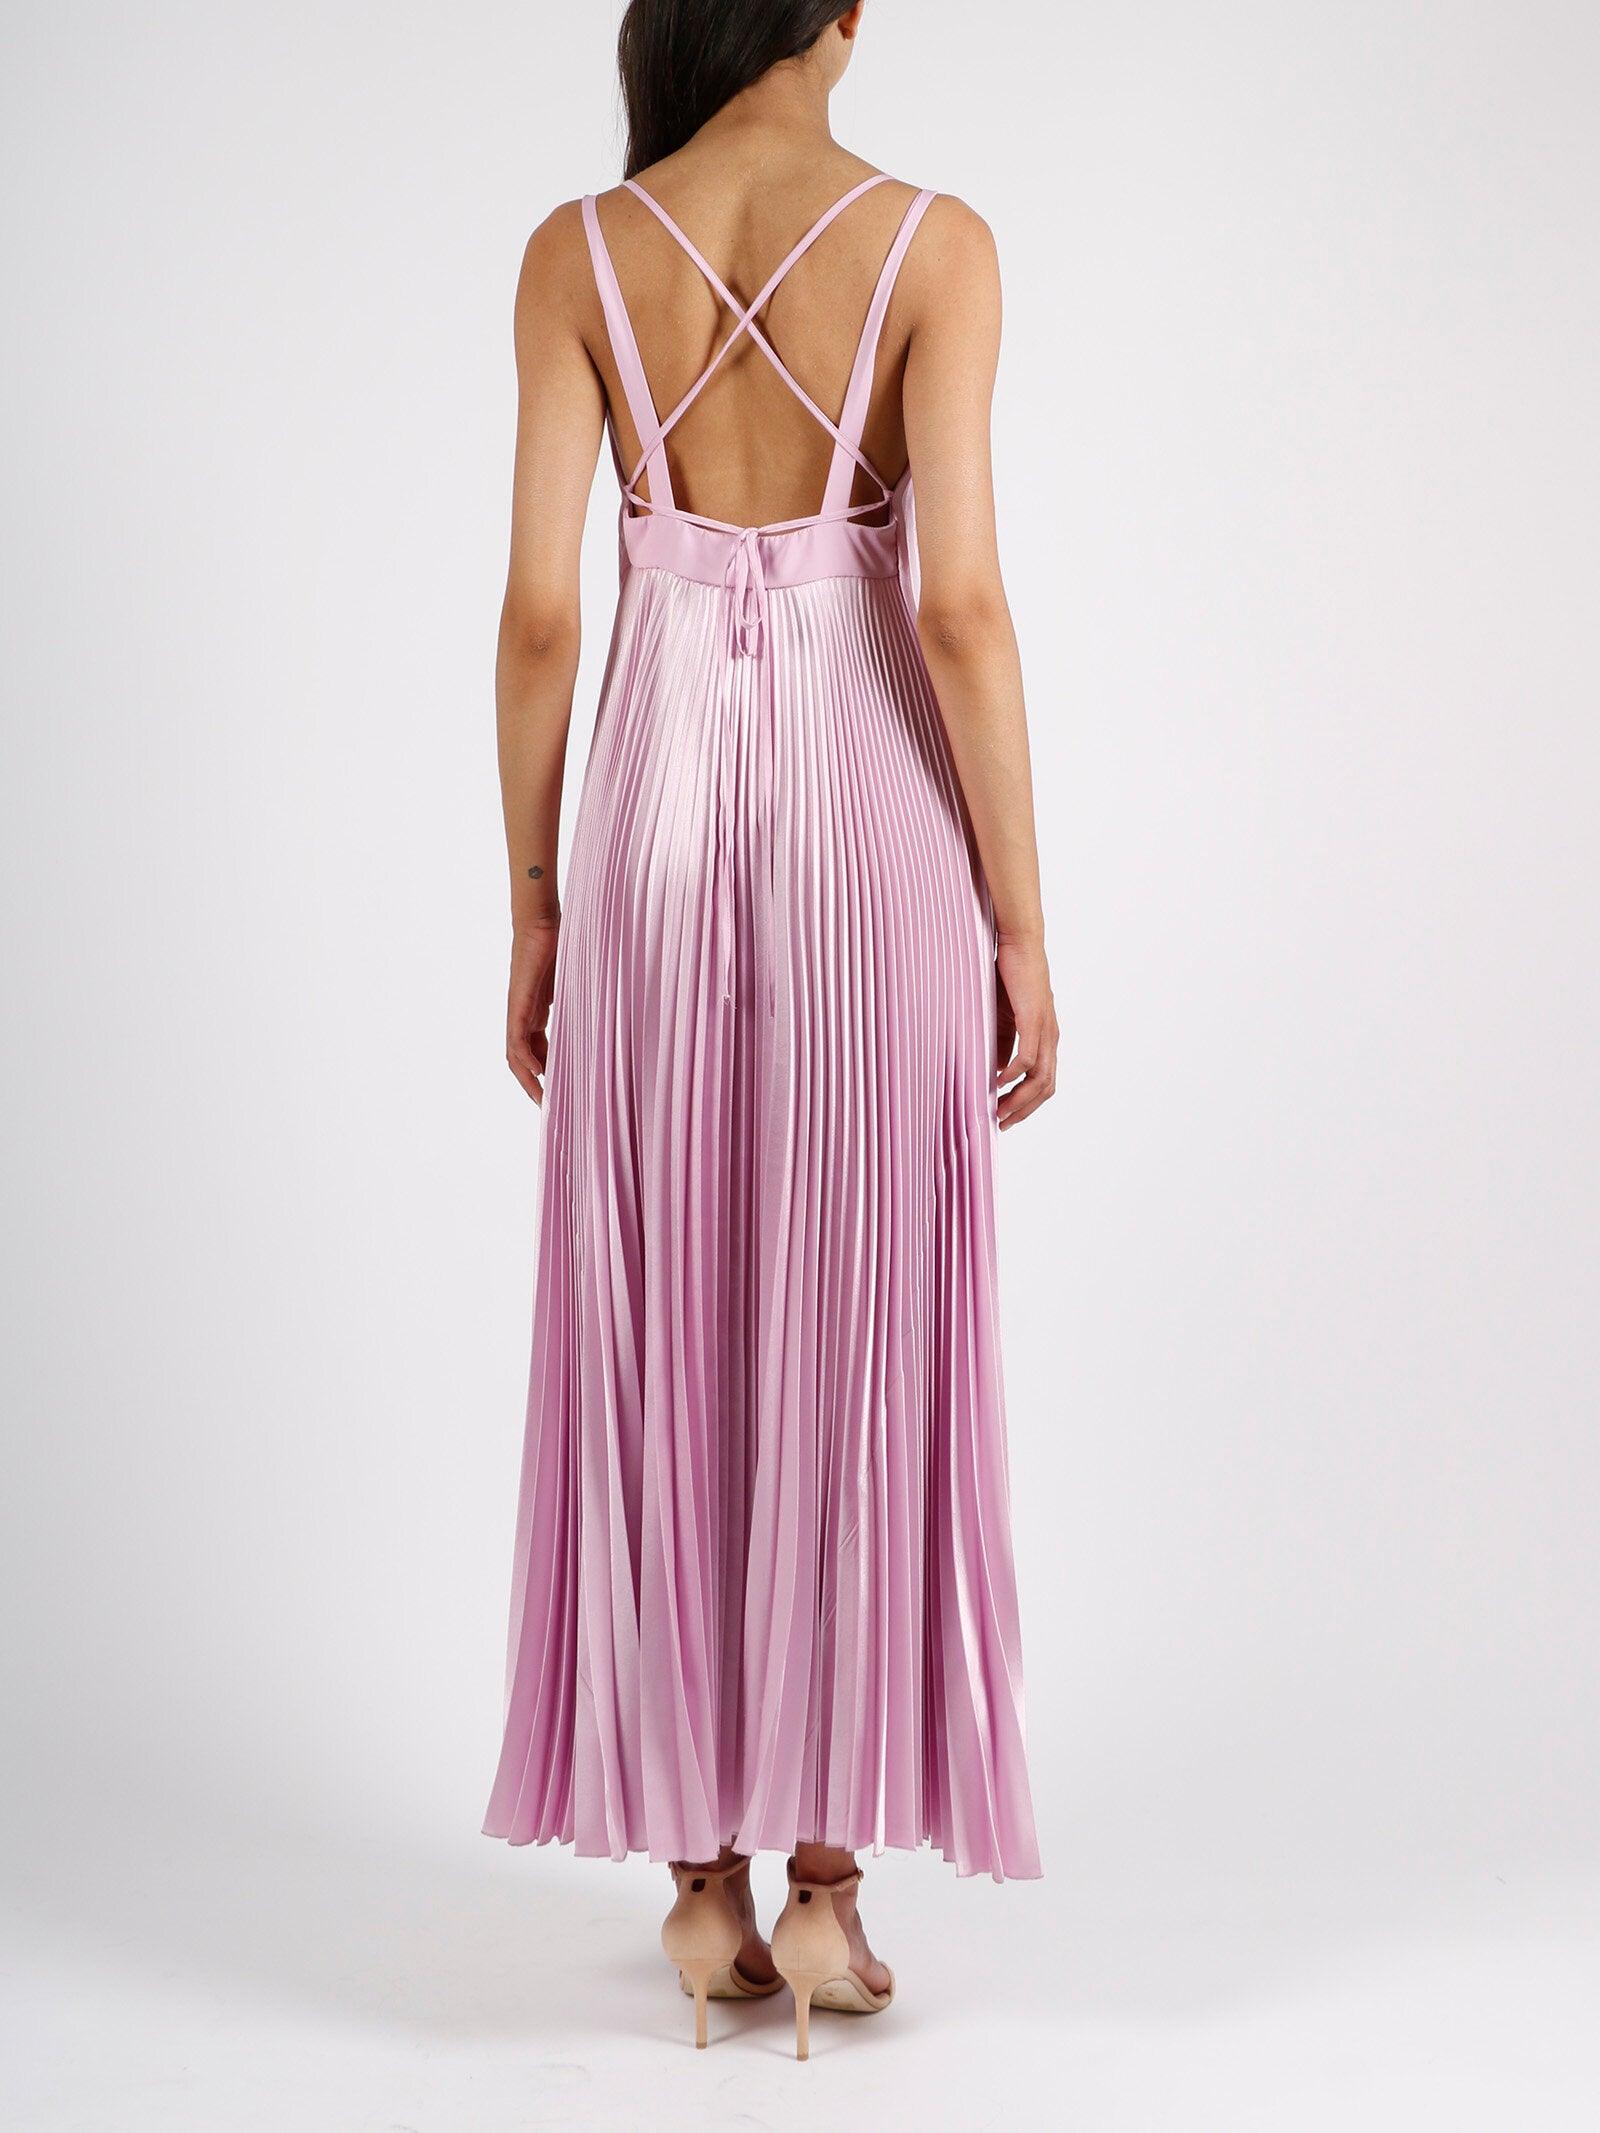 Long Pleated Satin Dress by Beatrice B (Various Colors) - Haven